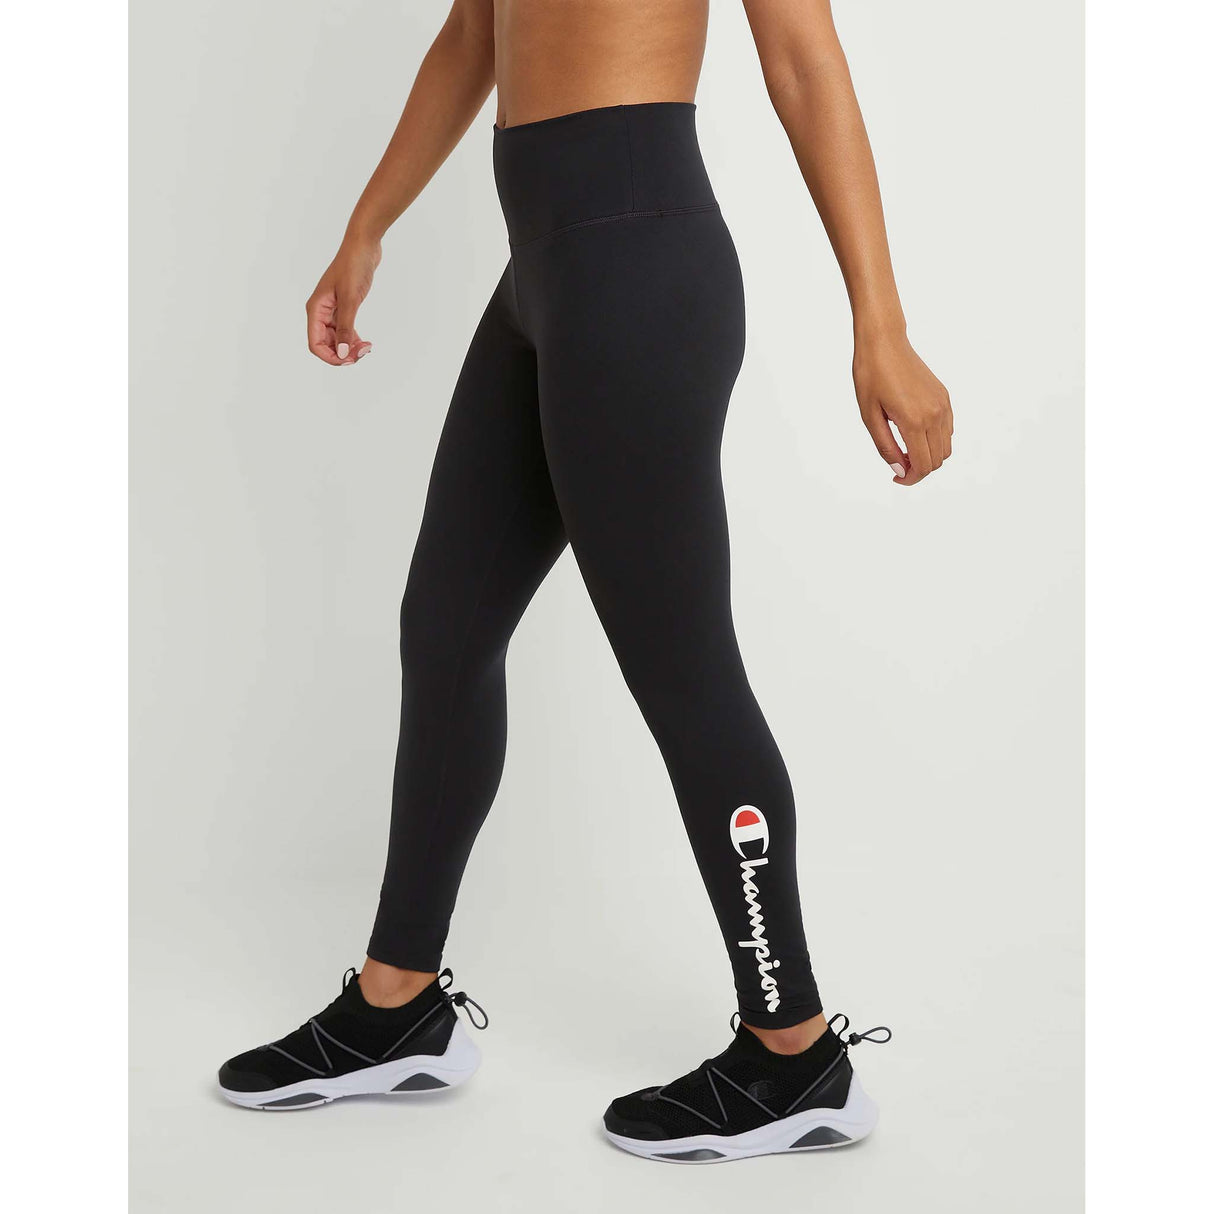 Champion Soft Touch Eco High-Rise Tight Graphic legging taille haute noir femme lateral gauche